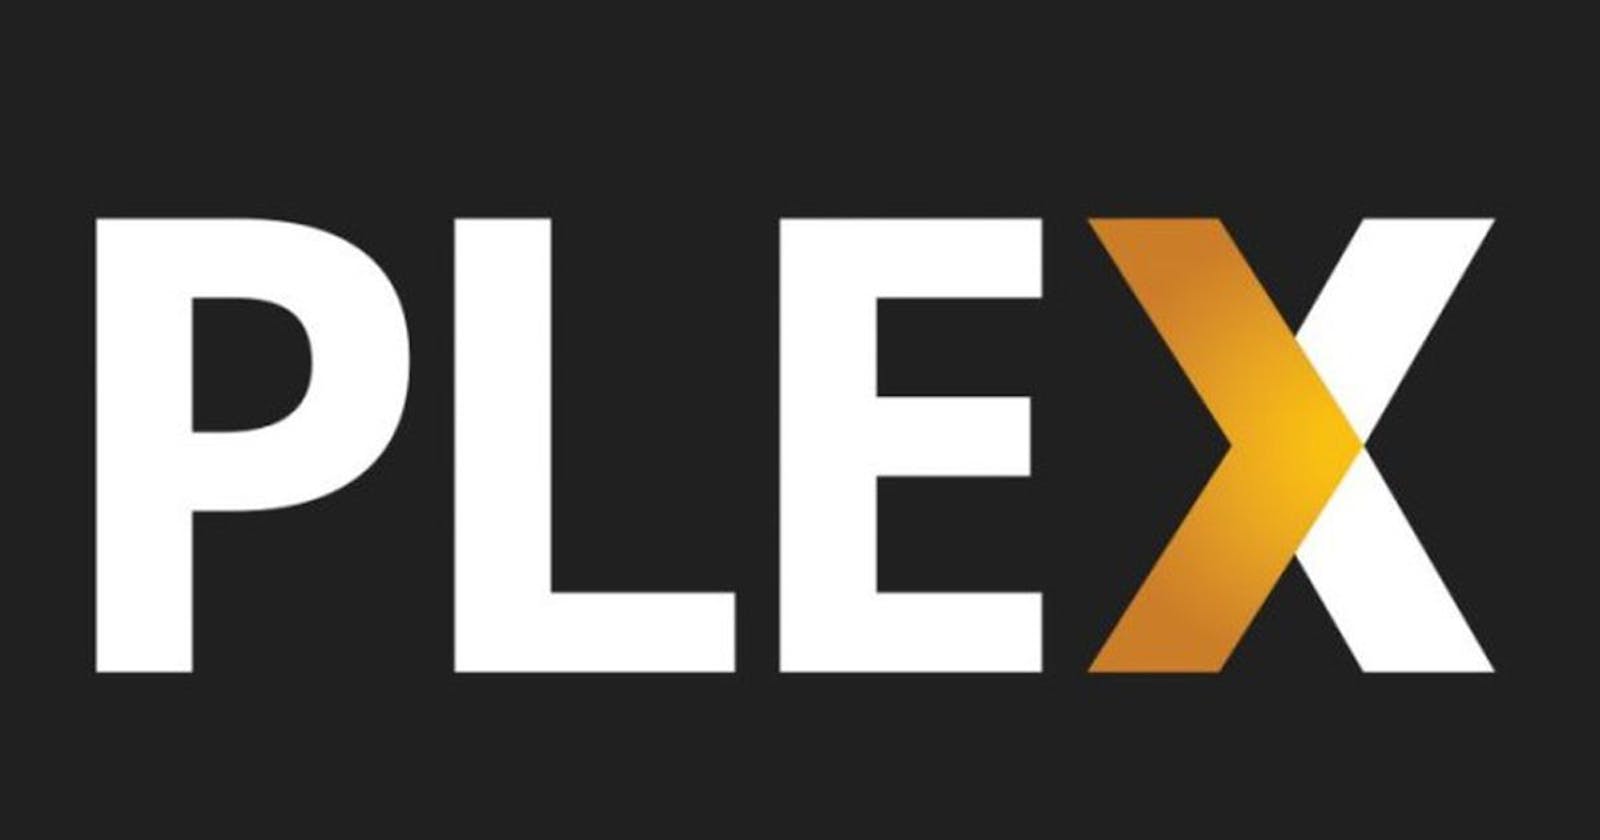 [UPDATED] Full guide on making a Plex server with automated torrent downloads using Docker